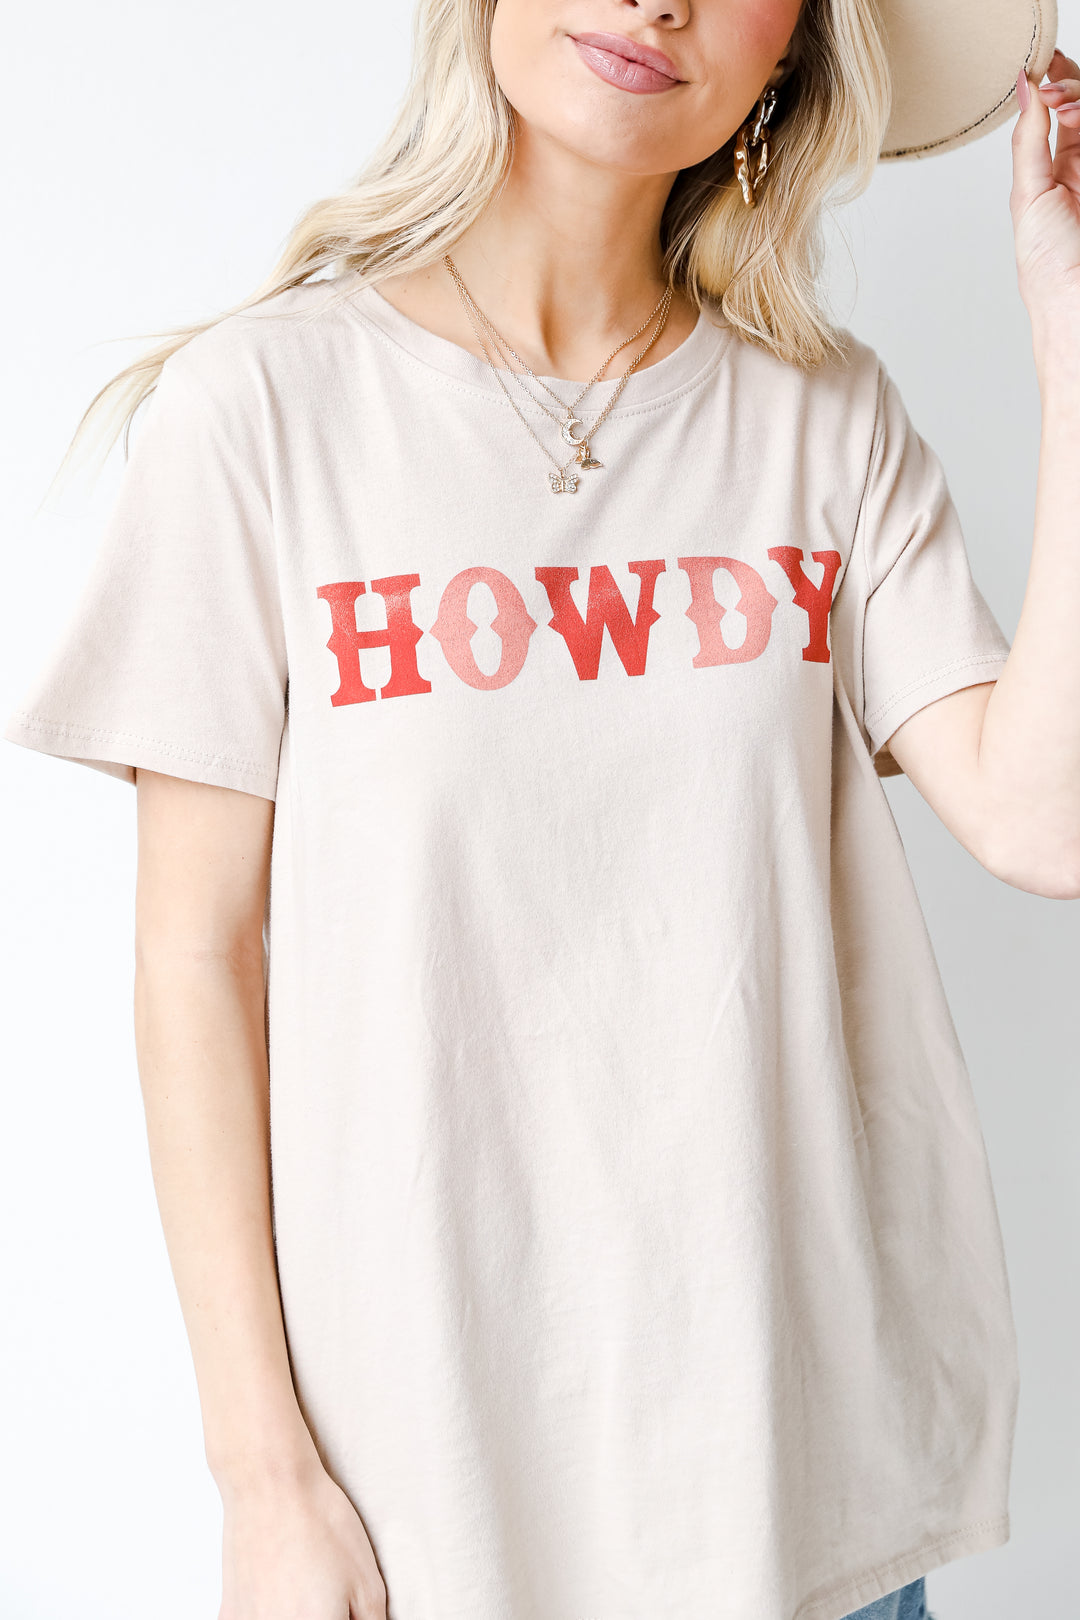 Howdy Oversized Graphic Tee close up